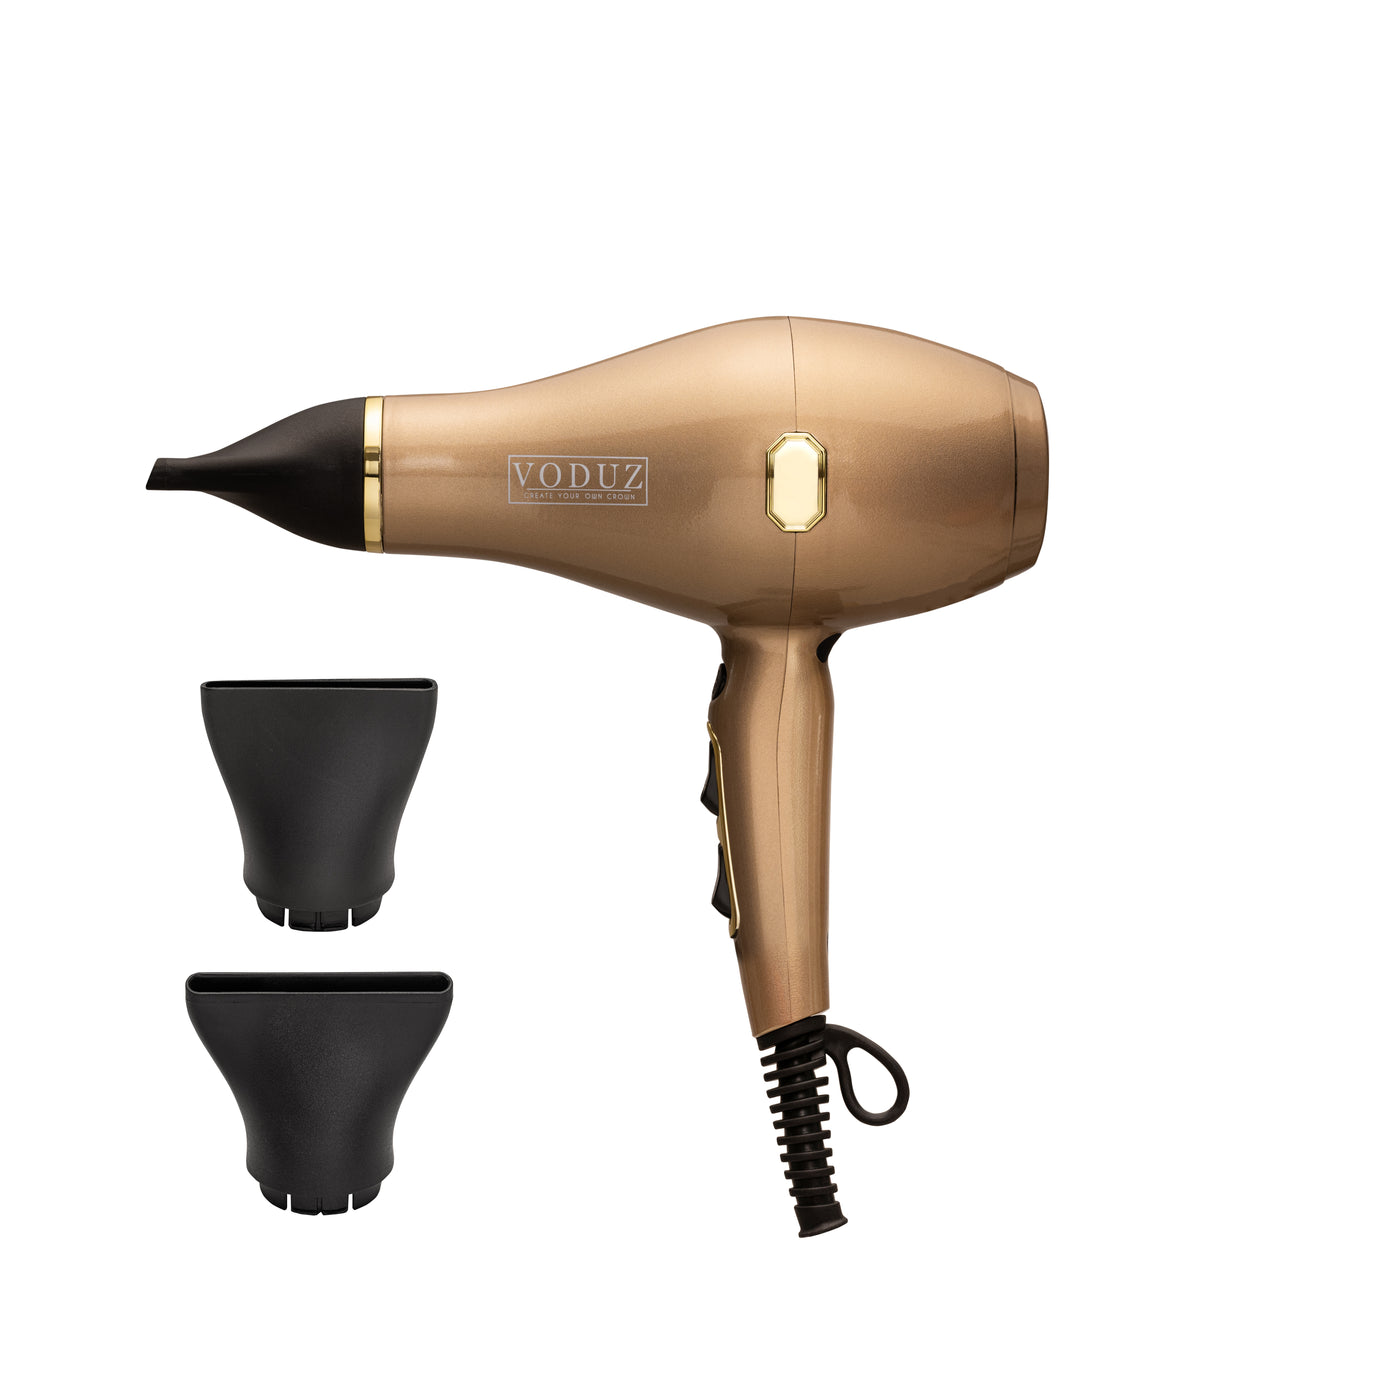 'Blow Out' Infrared Hair Dryer - Limited Edition Gold